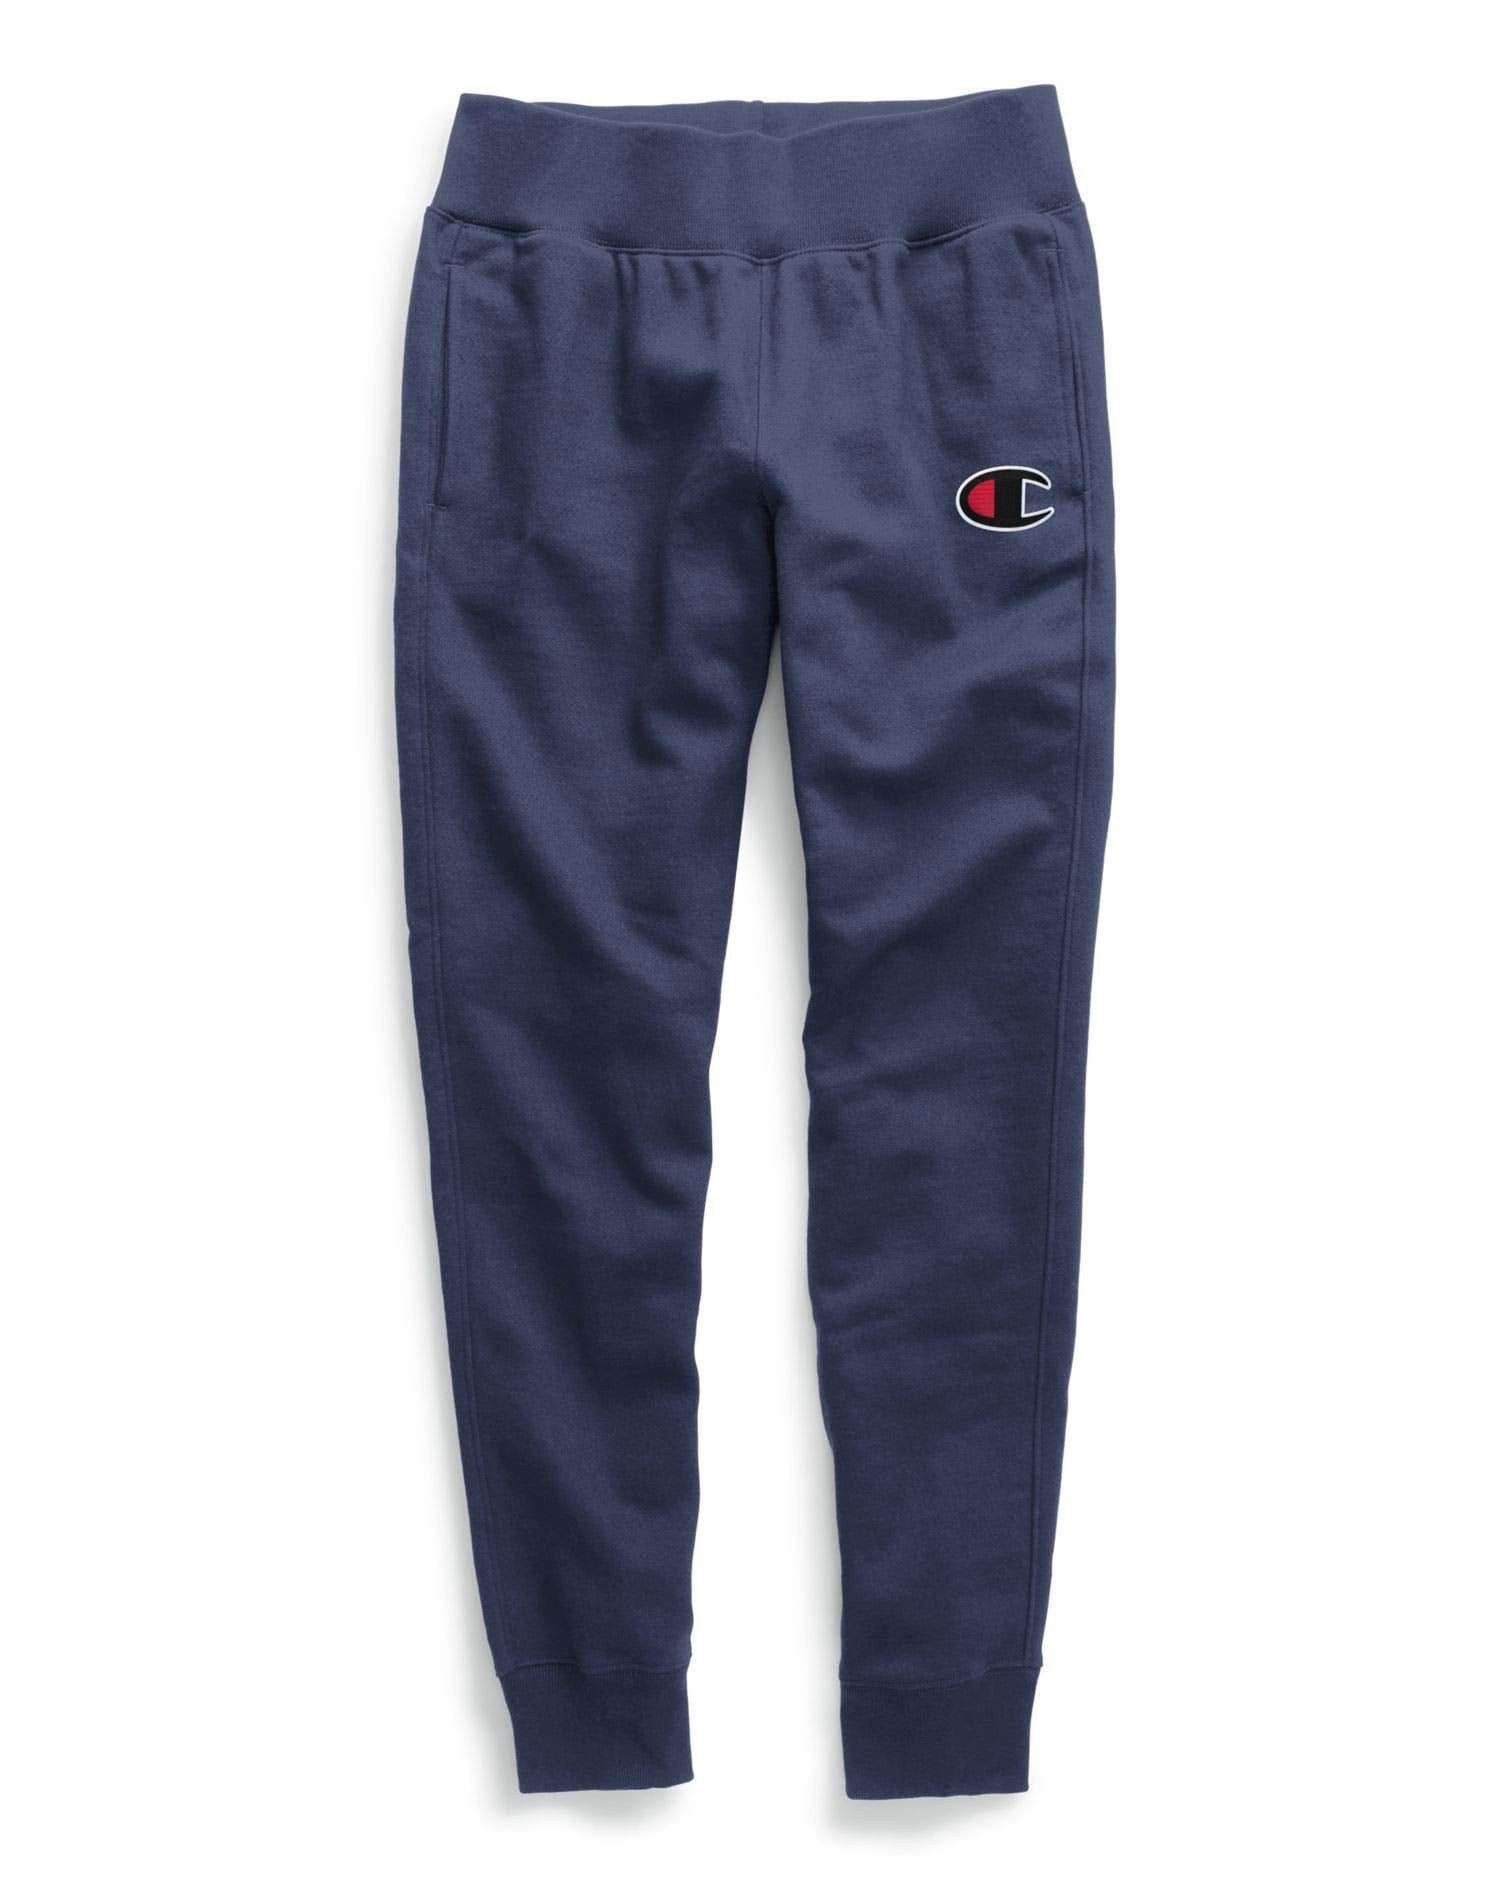 Champion LIFE Women's Reverse Weave Jogger Ladies Sweatpants - Choose Color  and Size (Imperial Indigo-y07482, X-Large)